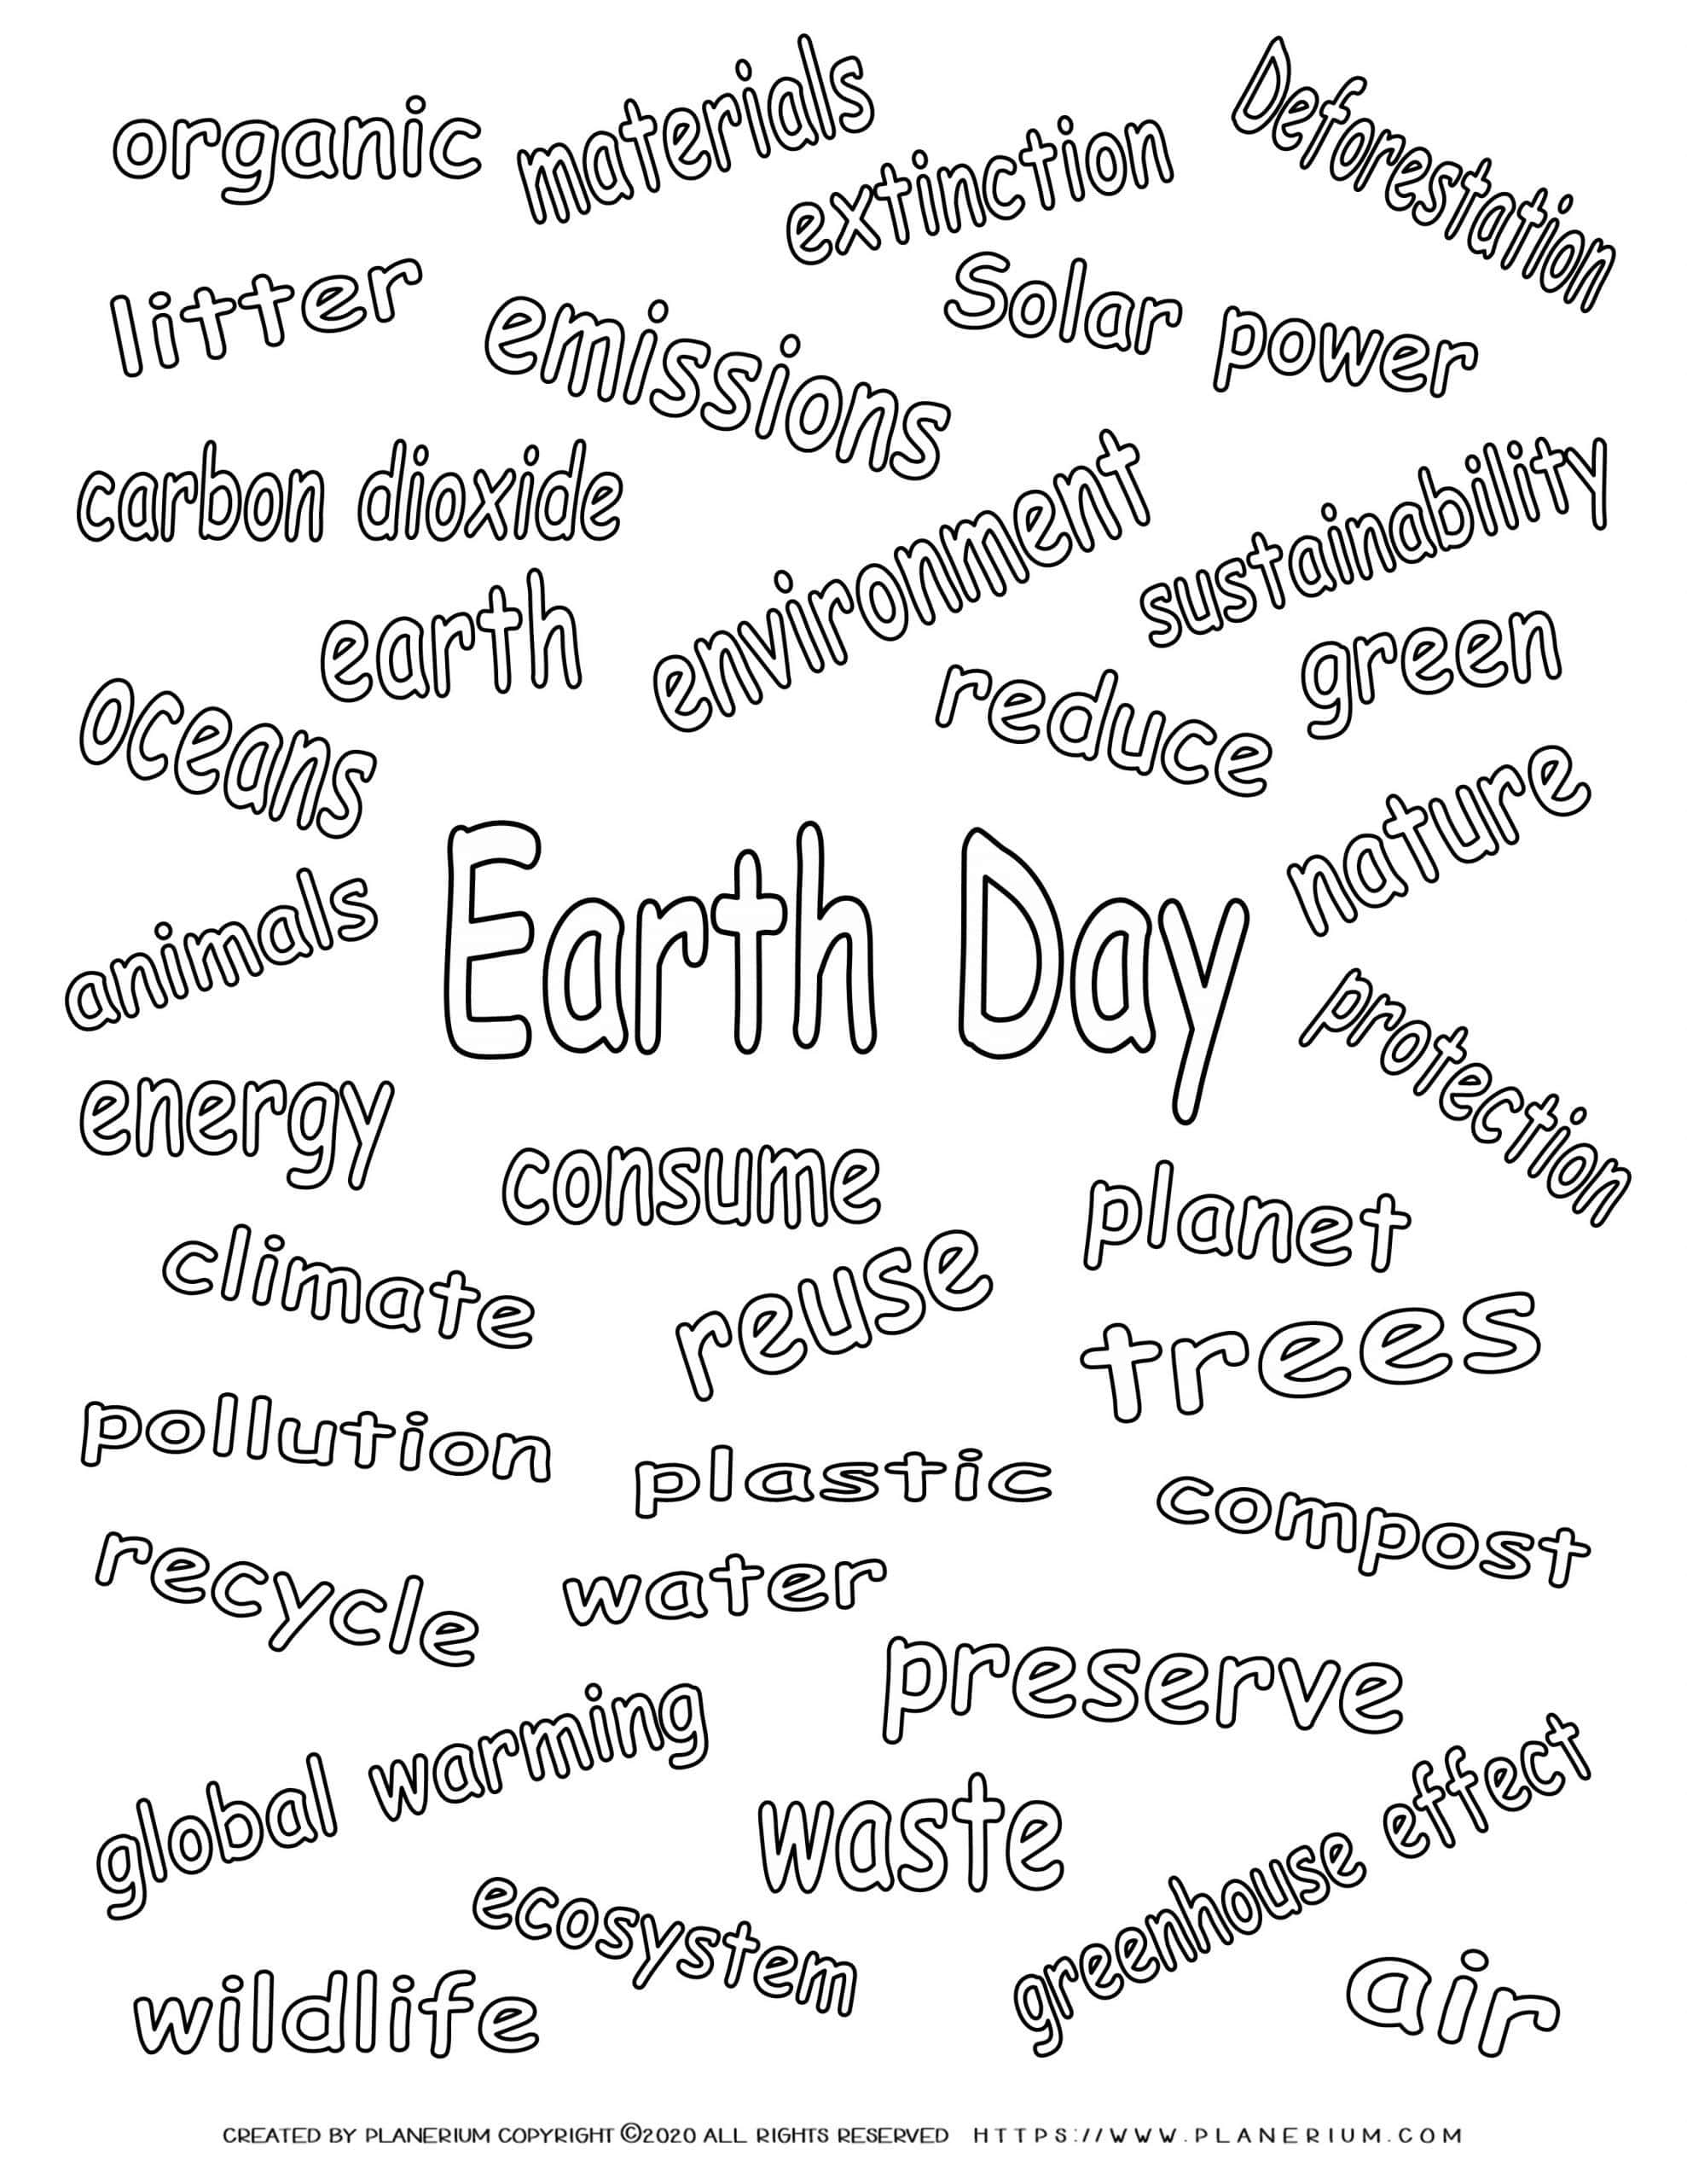 Earth day - Coloring page - Related Words